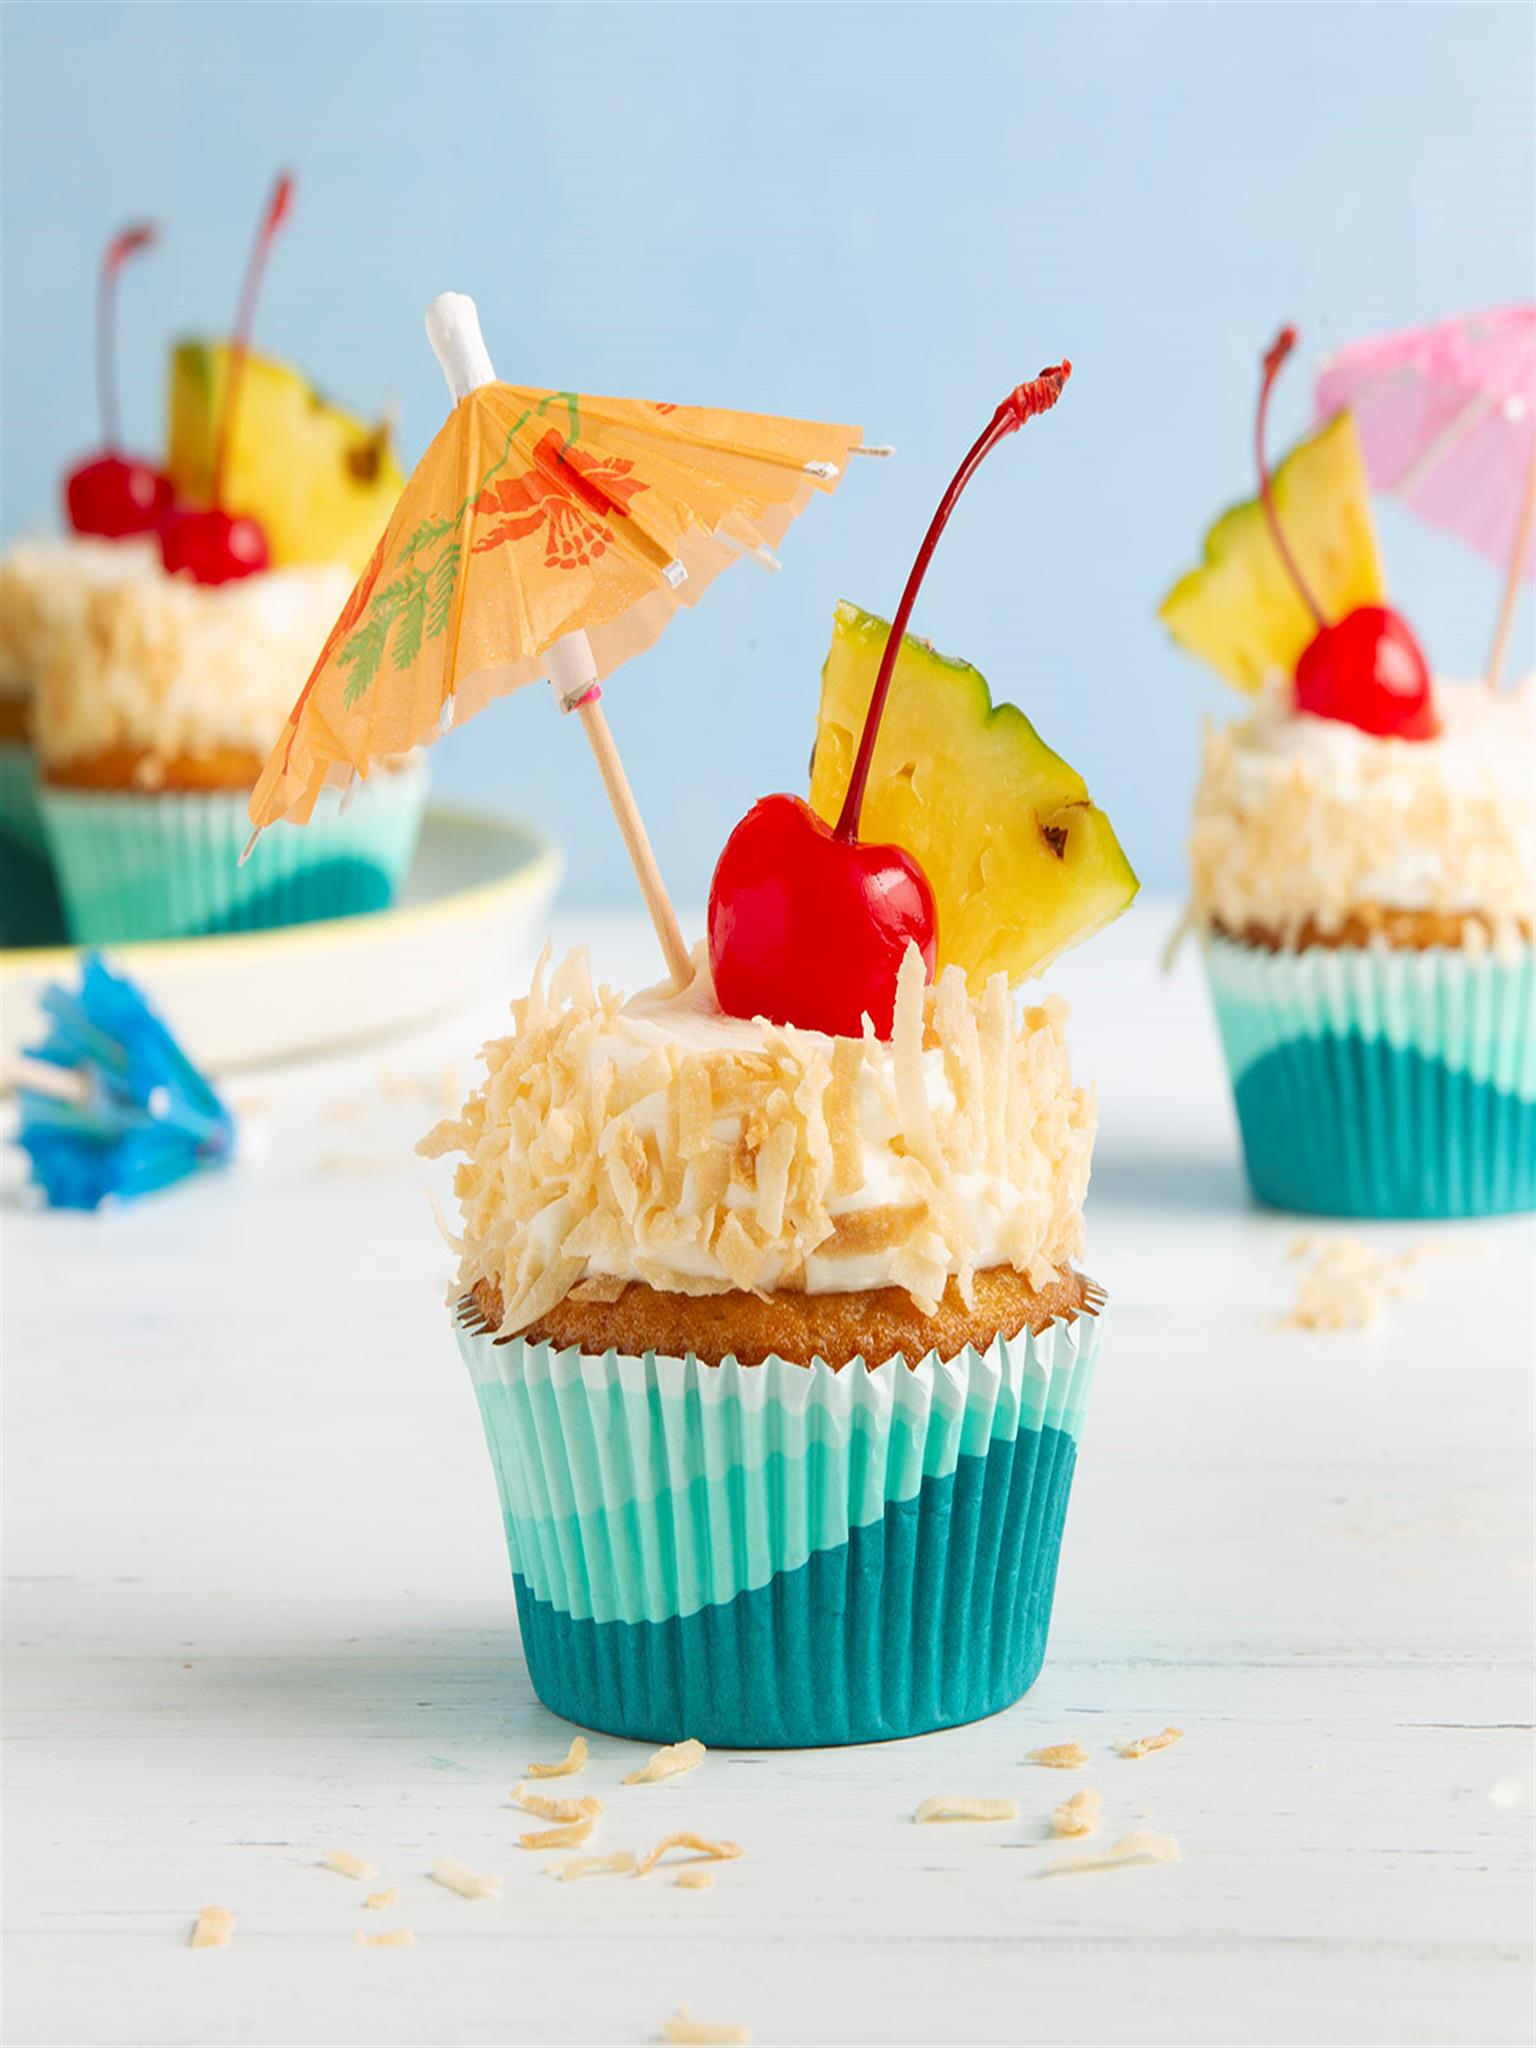 25 Cupcake Recipes That'll Make Any Day Sweeter